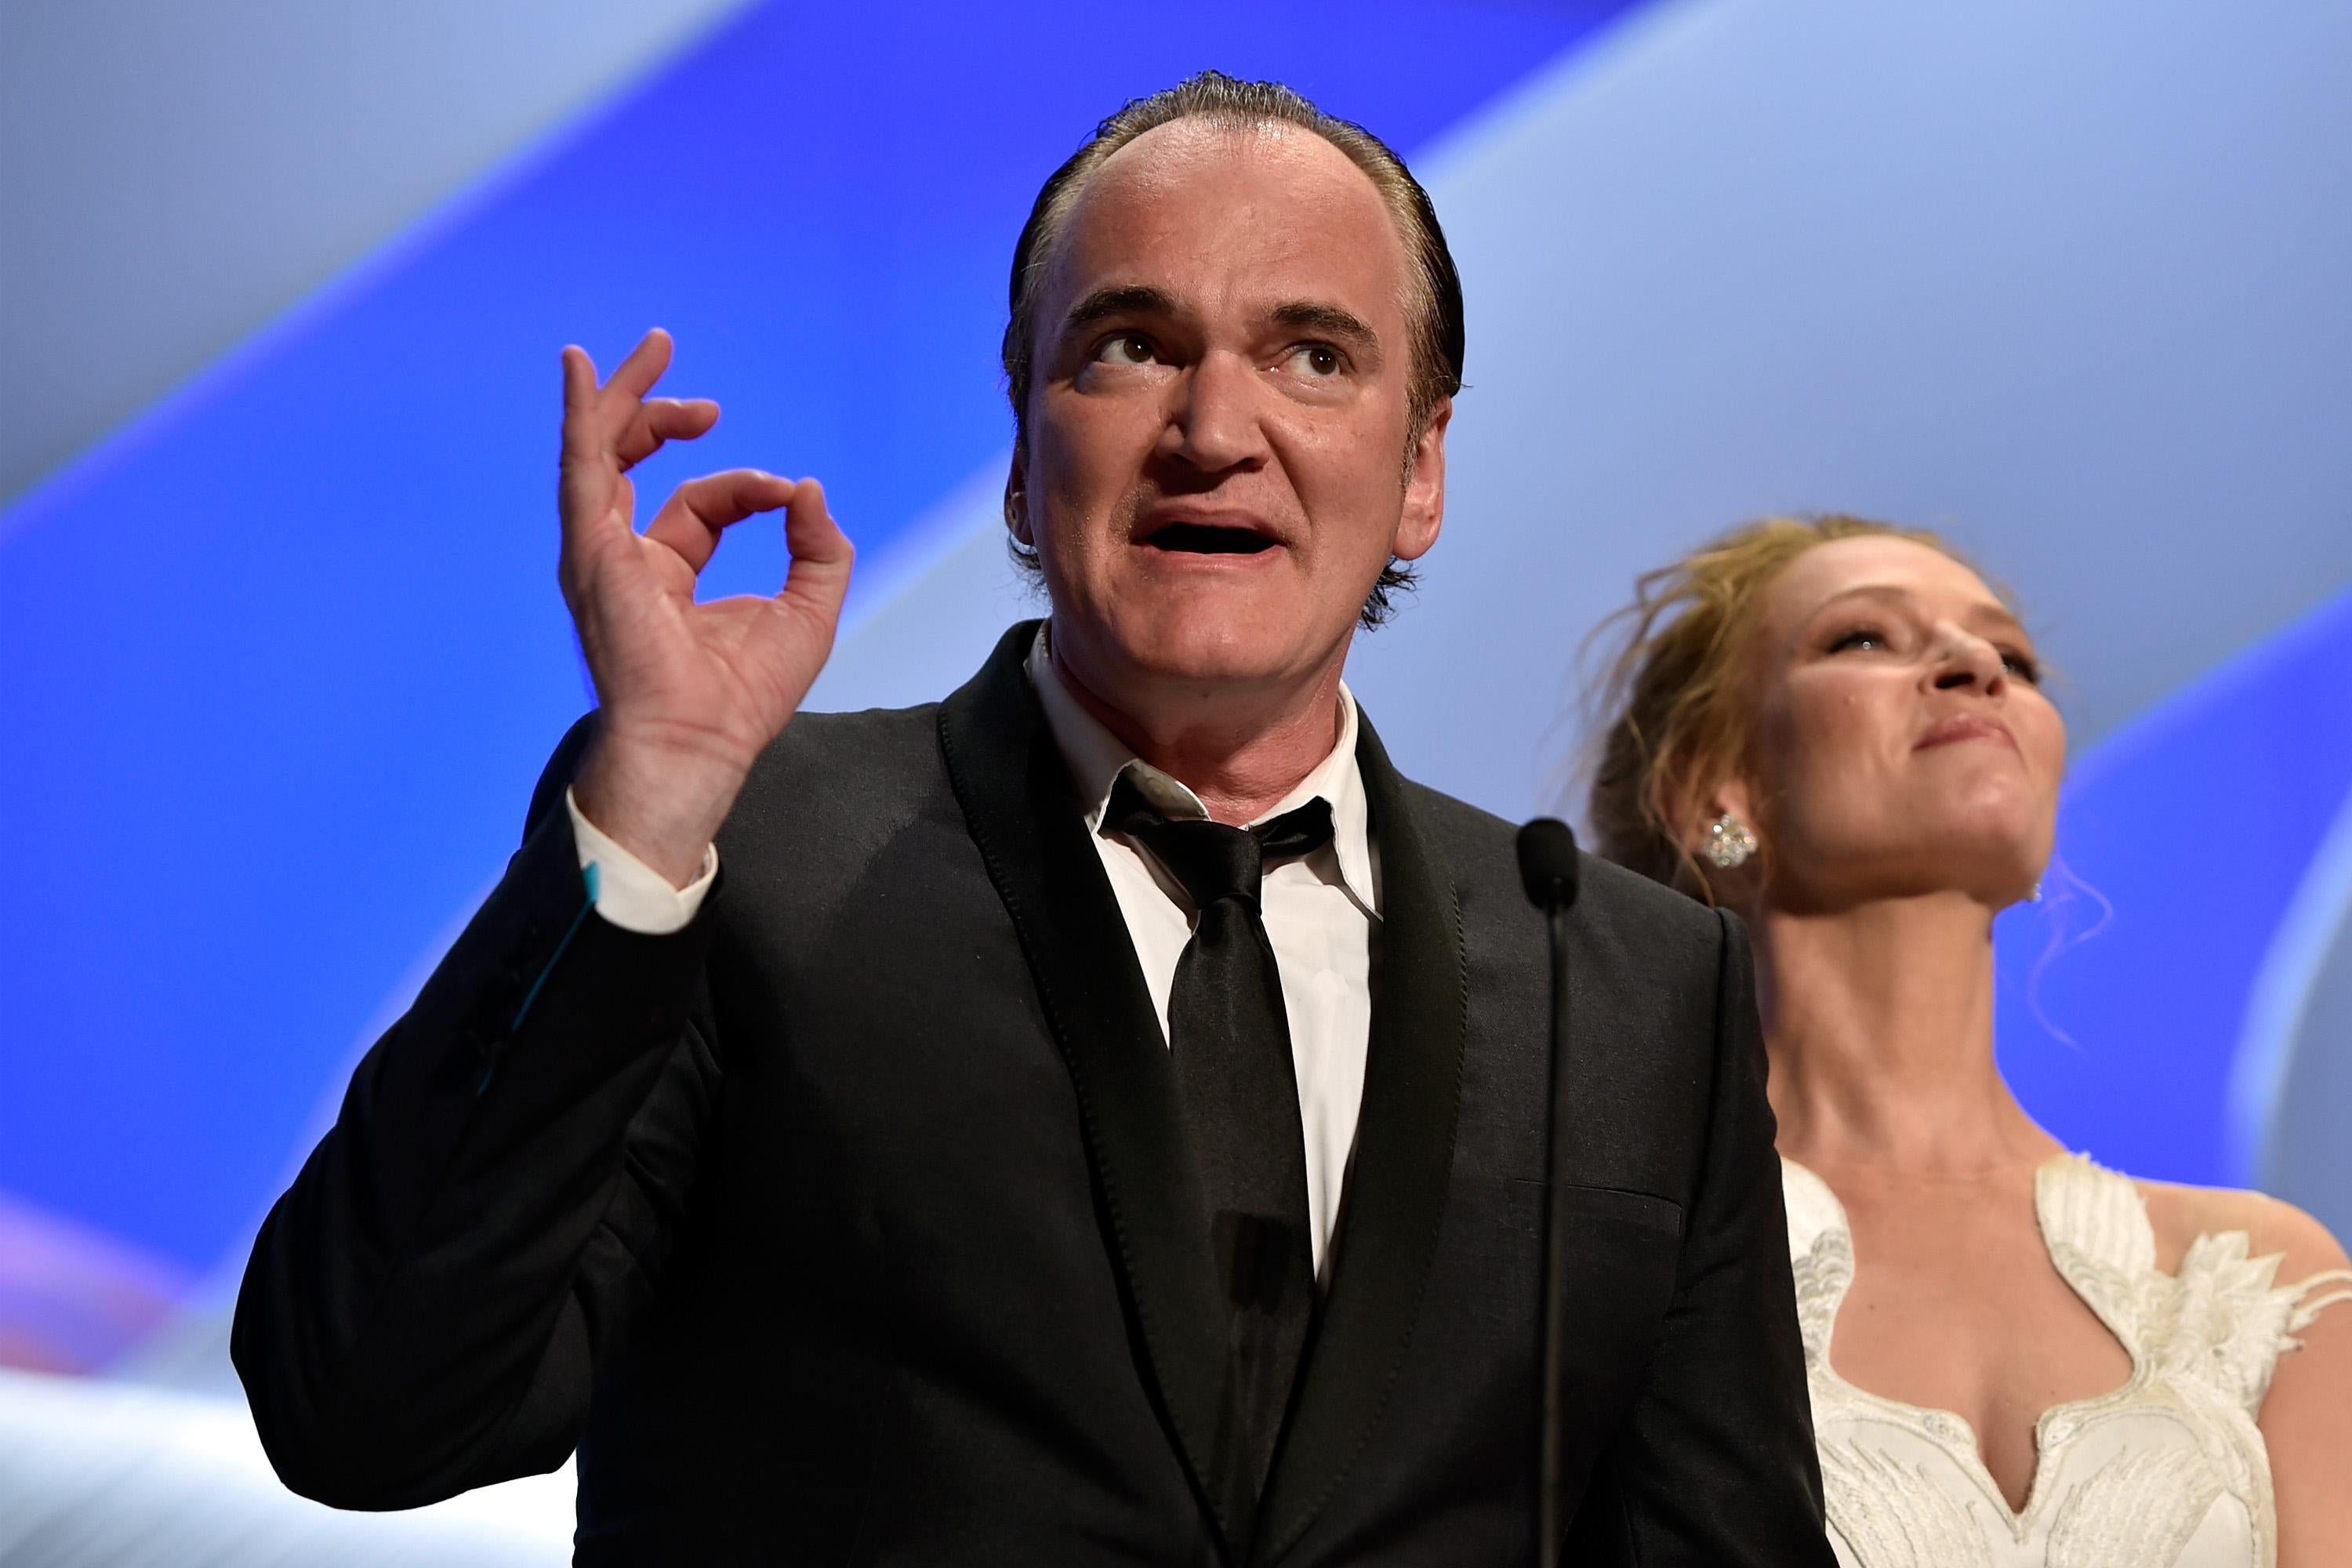 Quentin Tarantino holds his thumb and index finger together as Uma Thurman stands behind him